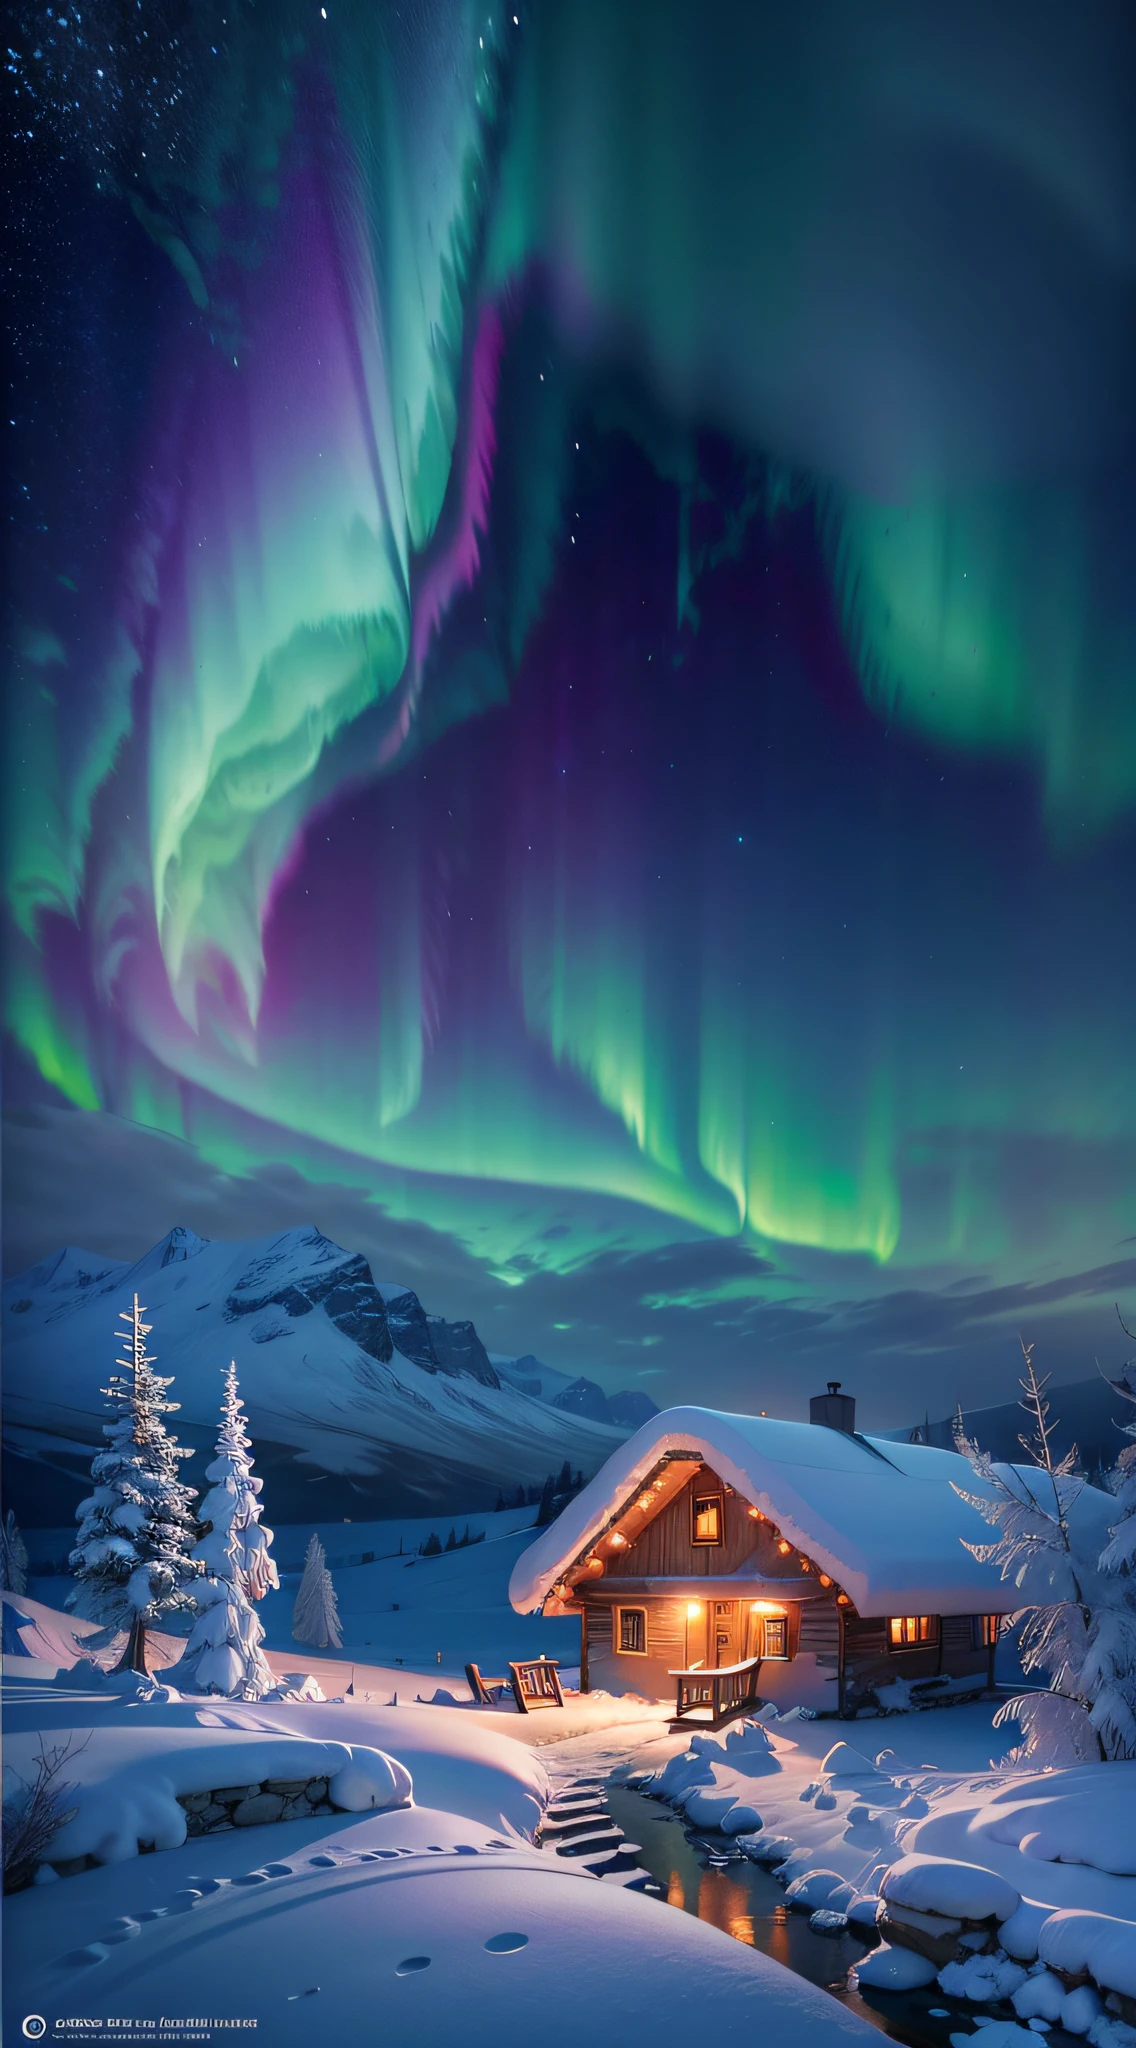 Best quality,A high resolution,(tmasterpiece:1.2),ultra - detailed,aurora borealis, Towering snow-capped mountains, cottage house covered in snow,A snowy hideaway, reindeer,pedestrians,sled,Winter wonderland,vibrant with colors, ​​clouds,thin fog,themoon,galaxias, amazing scenery, Icy cliffs, Frozen lake, Calm, majestic and beautiful, star night, ethereal glowing, A miracle of nature, peaceful solitude, Celestial wonders, comprehensive, Natural phenomena, Christmas Eve, Calm reflection, glistening stars, Mysterious charm